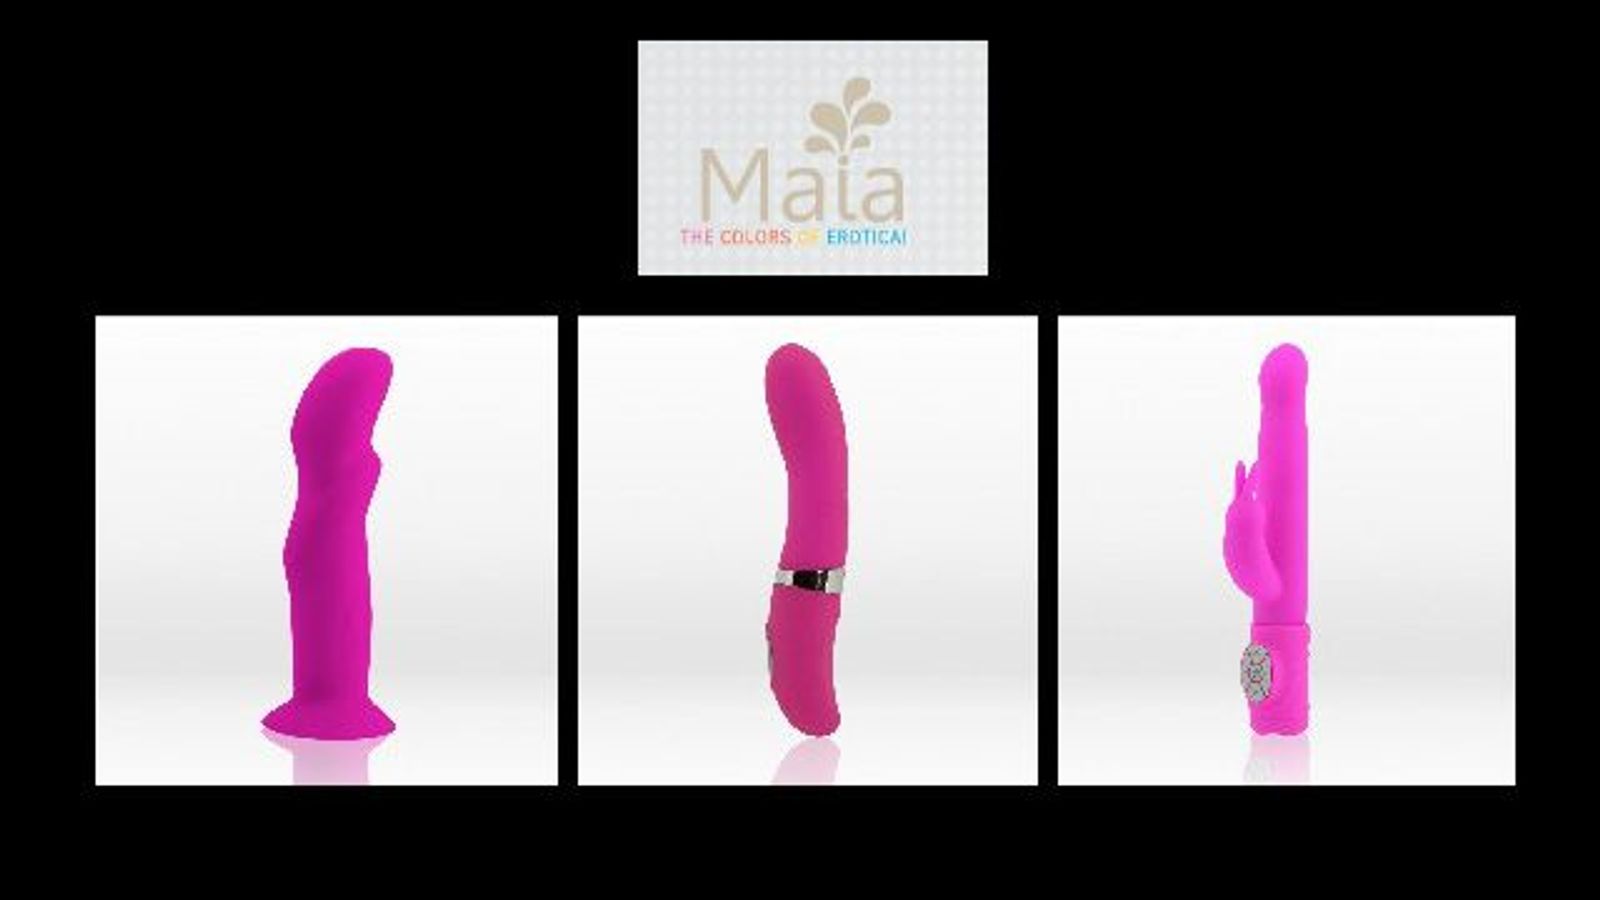 New Manufacturer Maia Relies on Color To Make A Splash